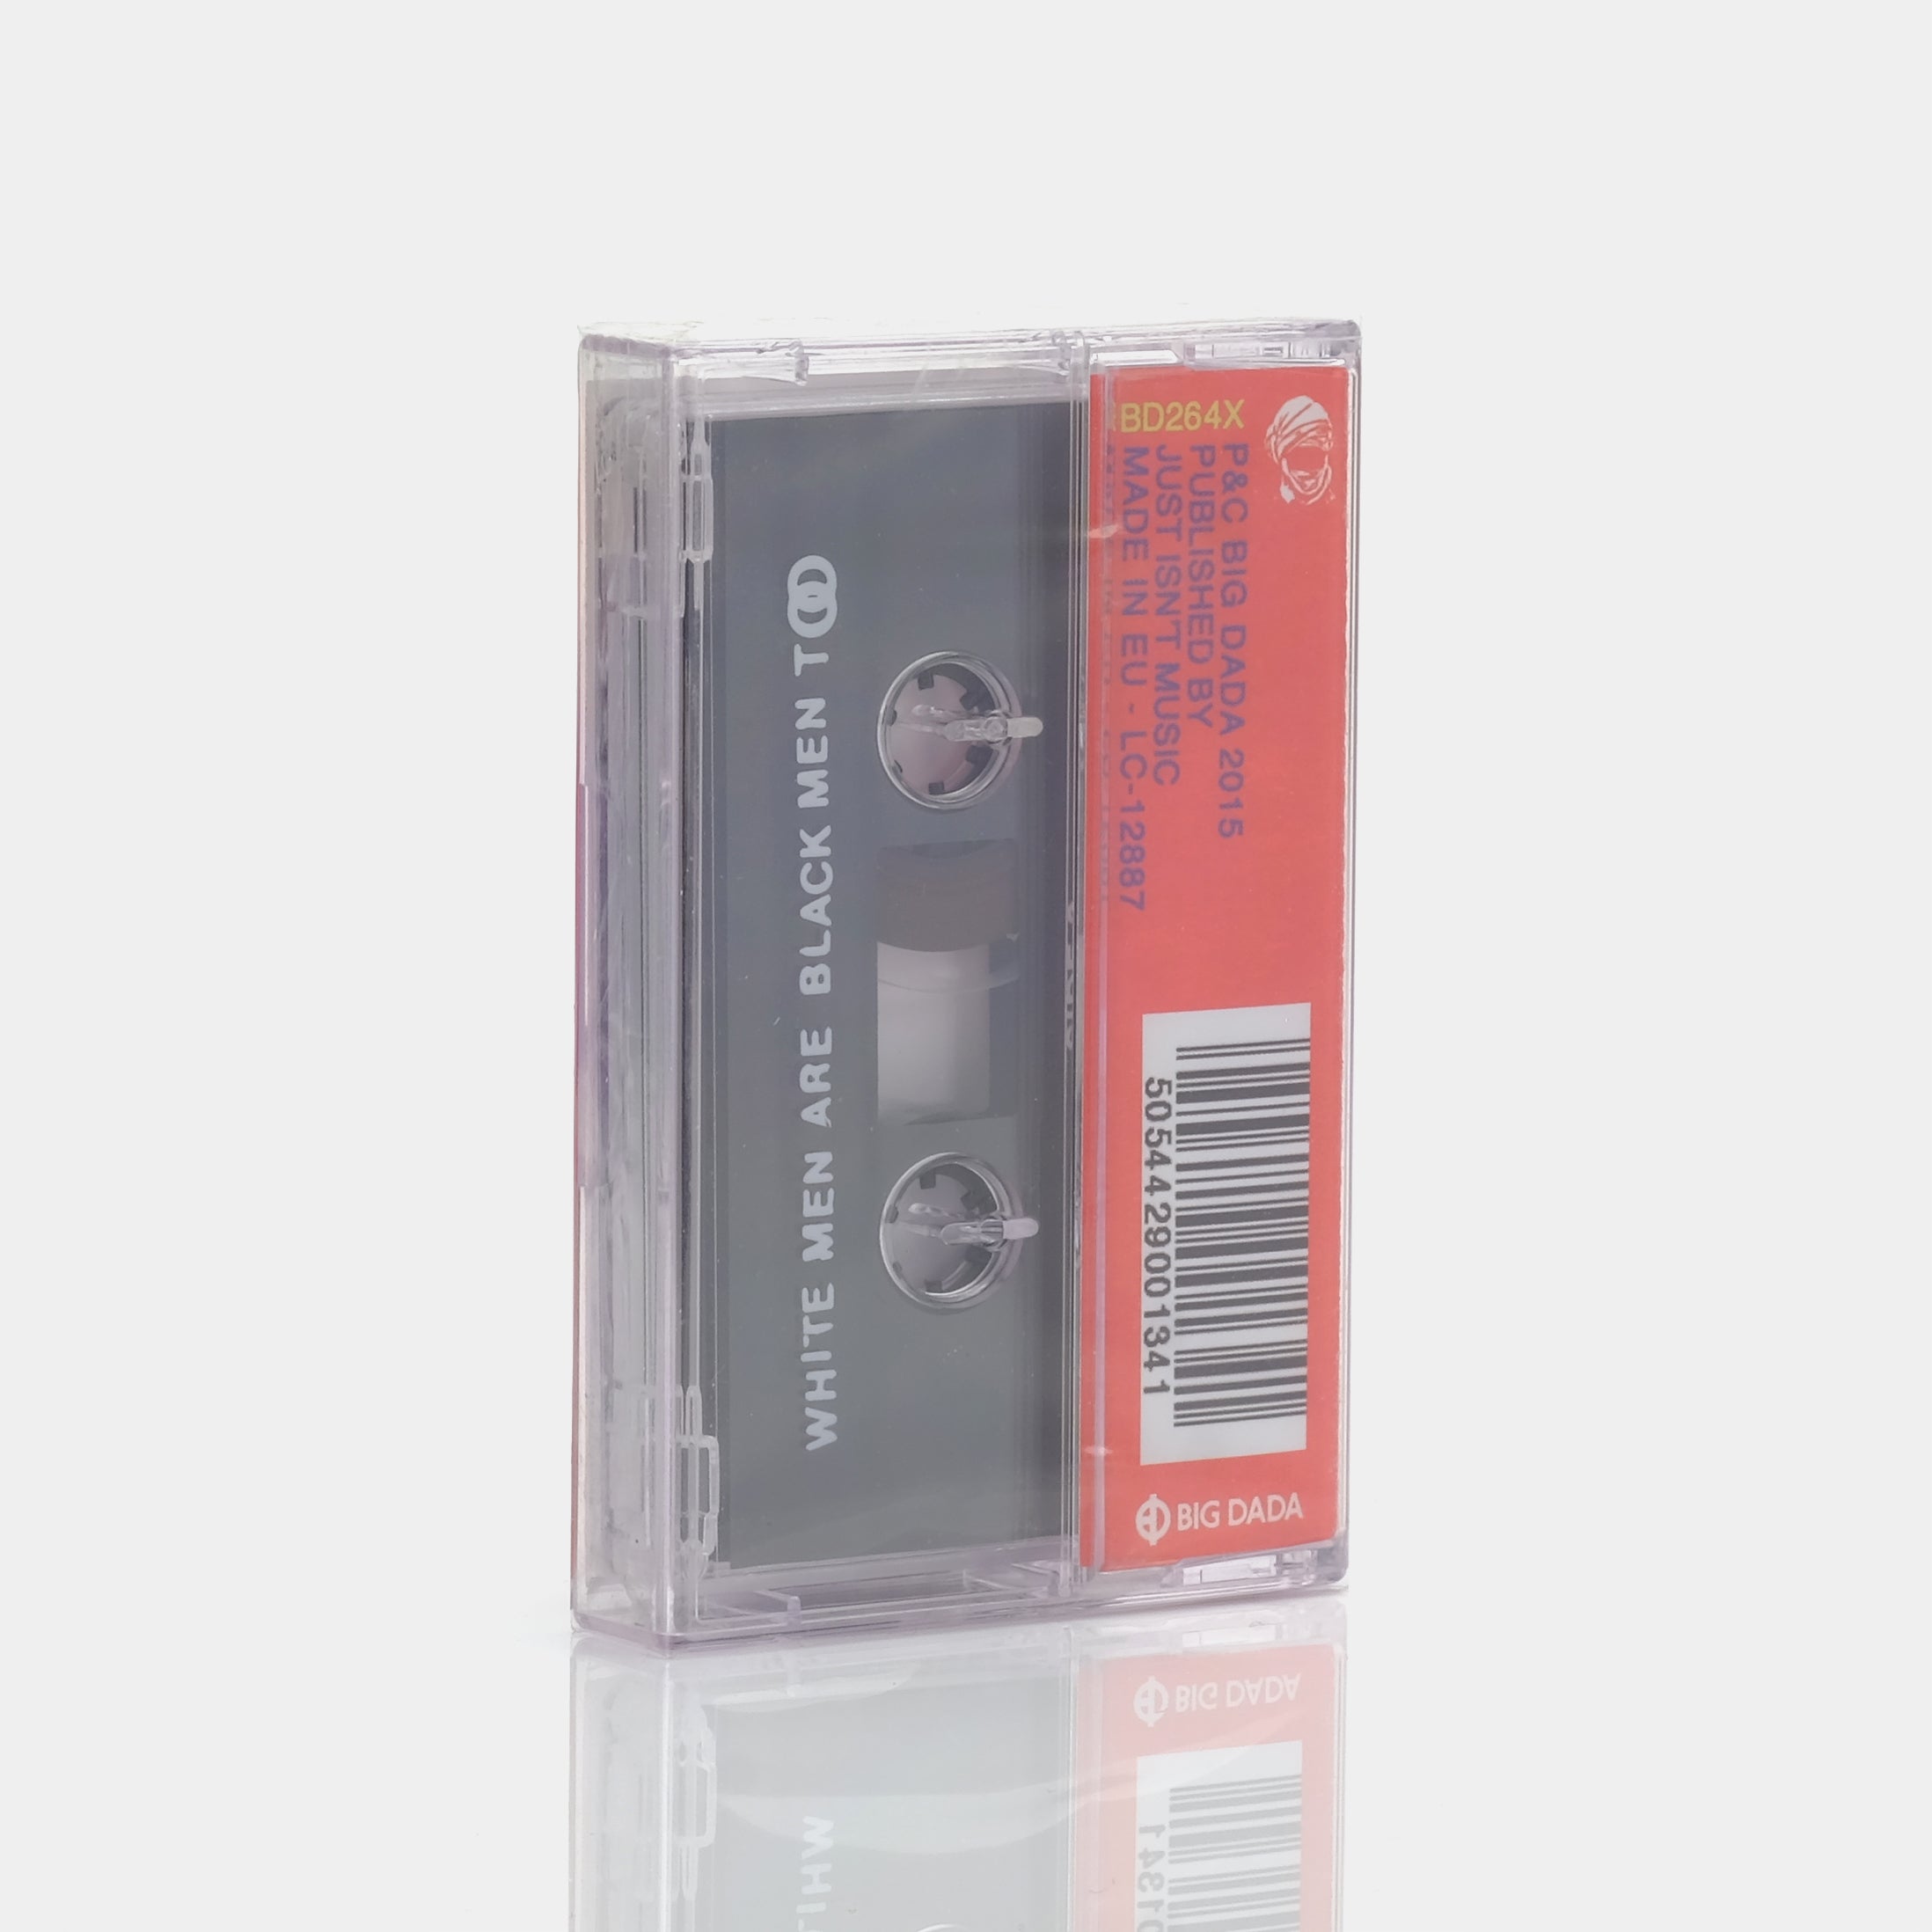 Young Fathers - White Men Are Black Men Too Cassette Tape